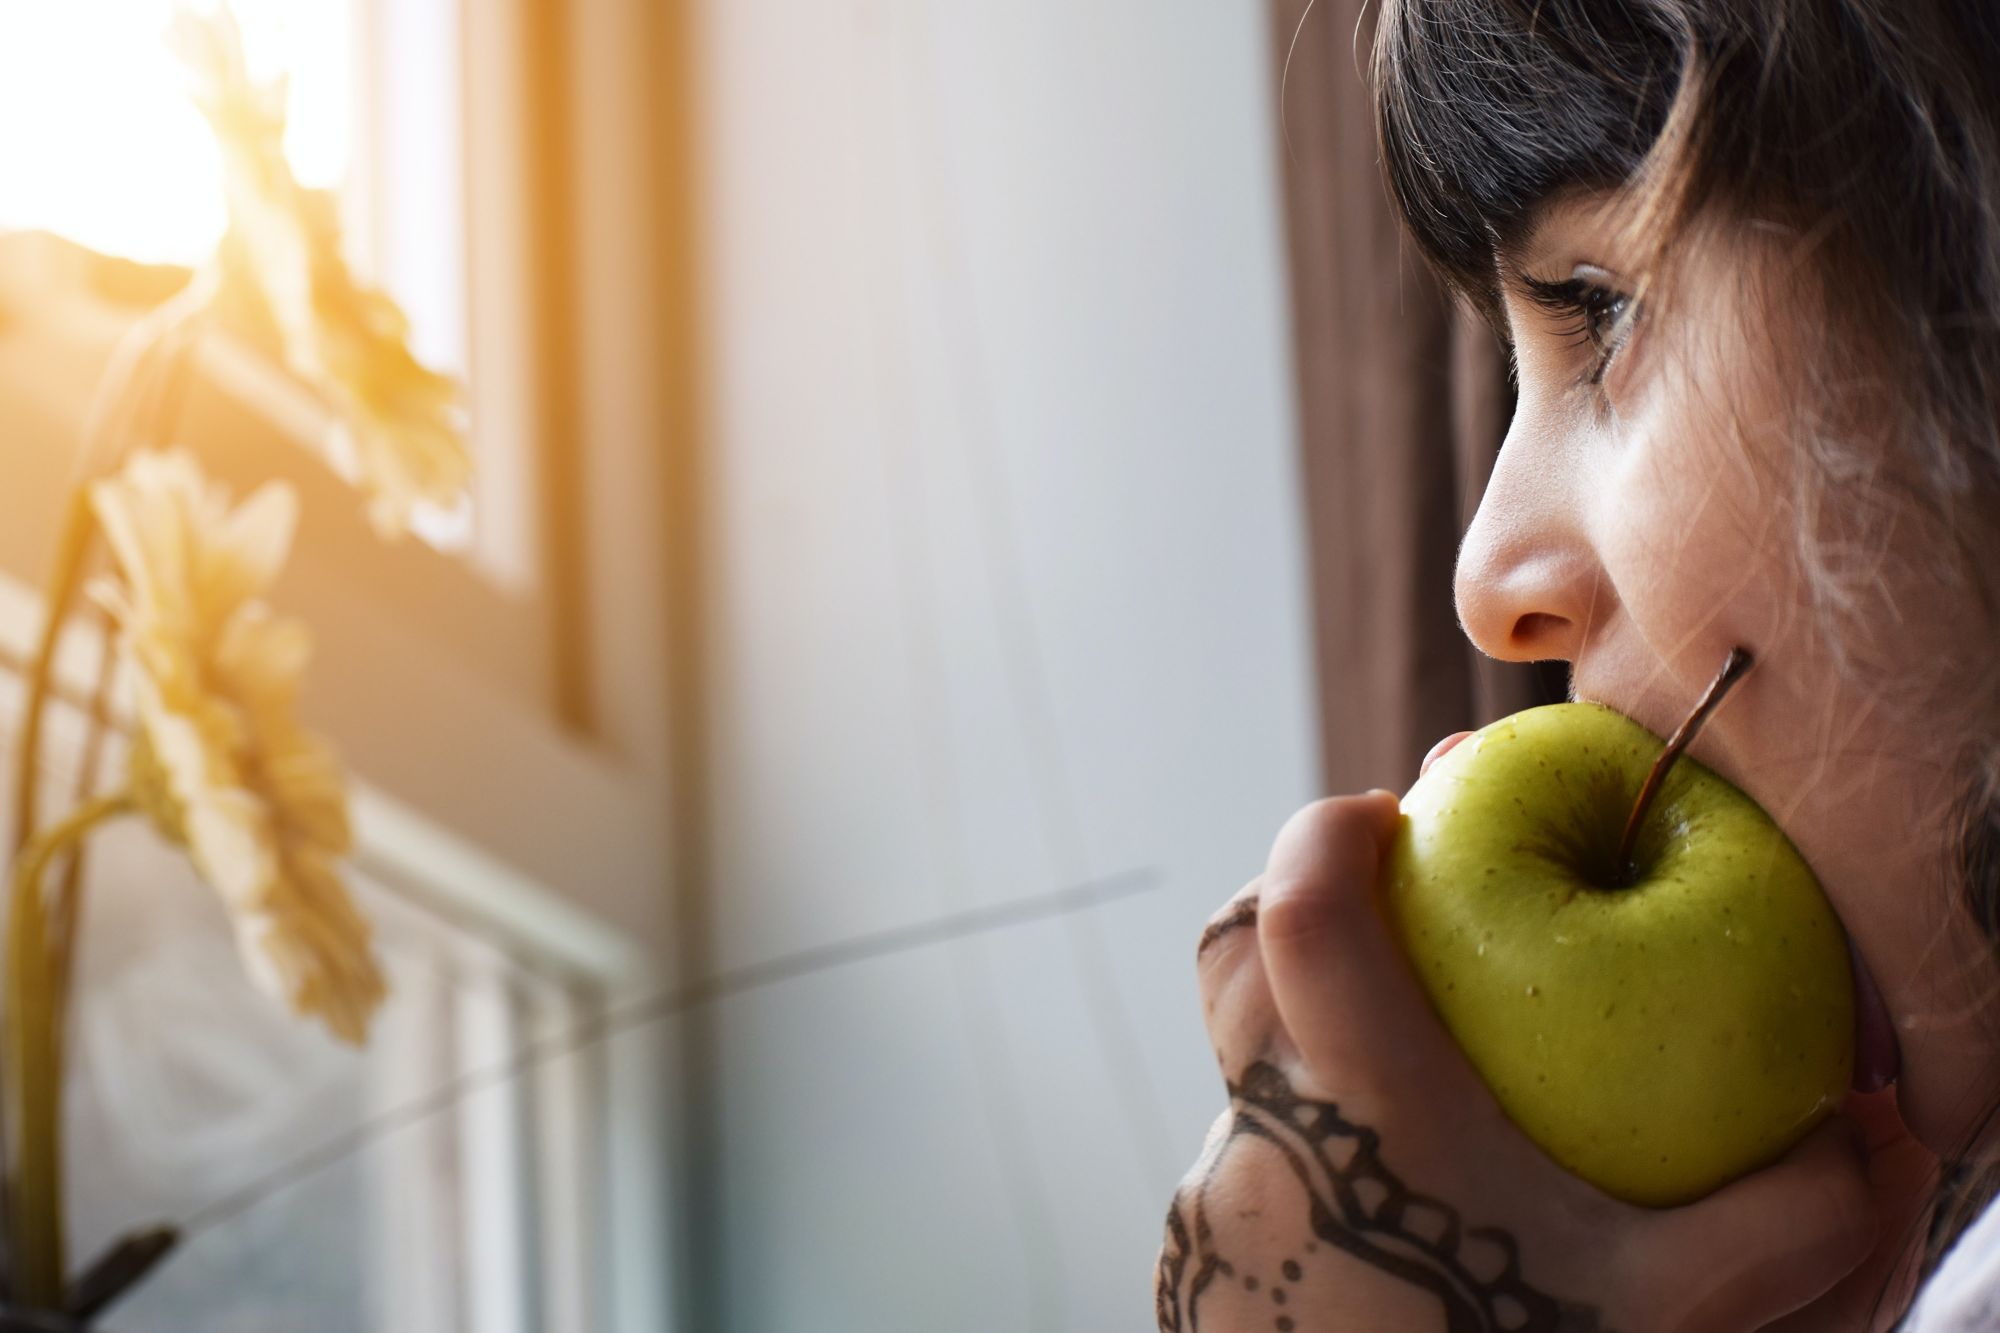 A side profile picture of a young girl, about 8 or 9 years old, biting into a green apple with mehndi on the hand grasping the apple. She is staring out of a window, with two or three sunflowers on the window sill in front of her with sunshine peering through the bottom corner of the top panel of the horizontally divided window.